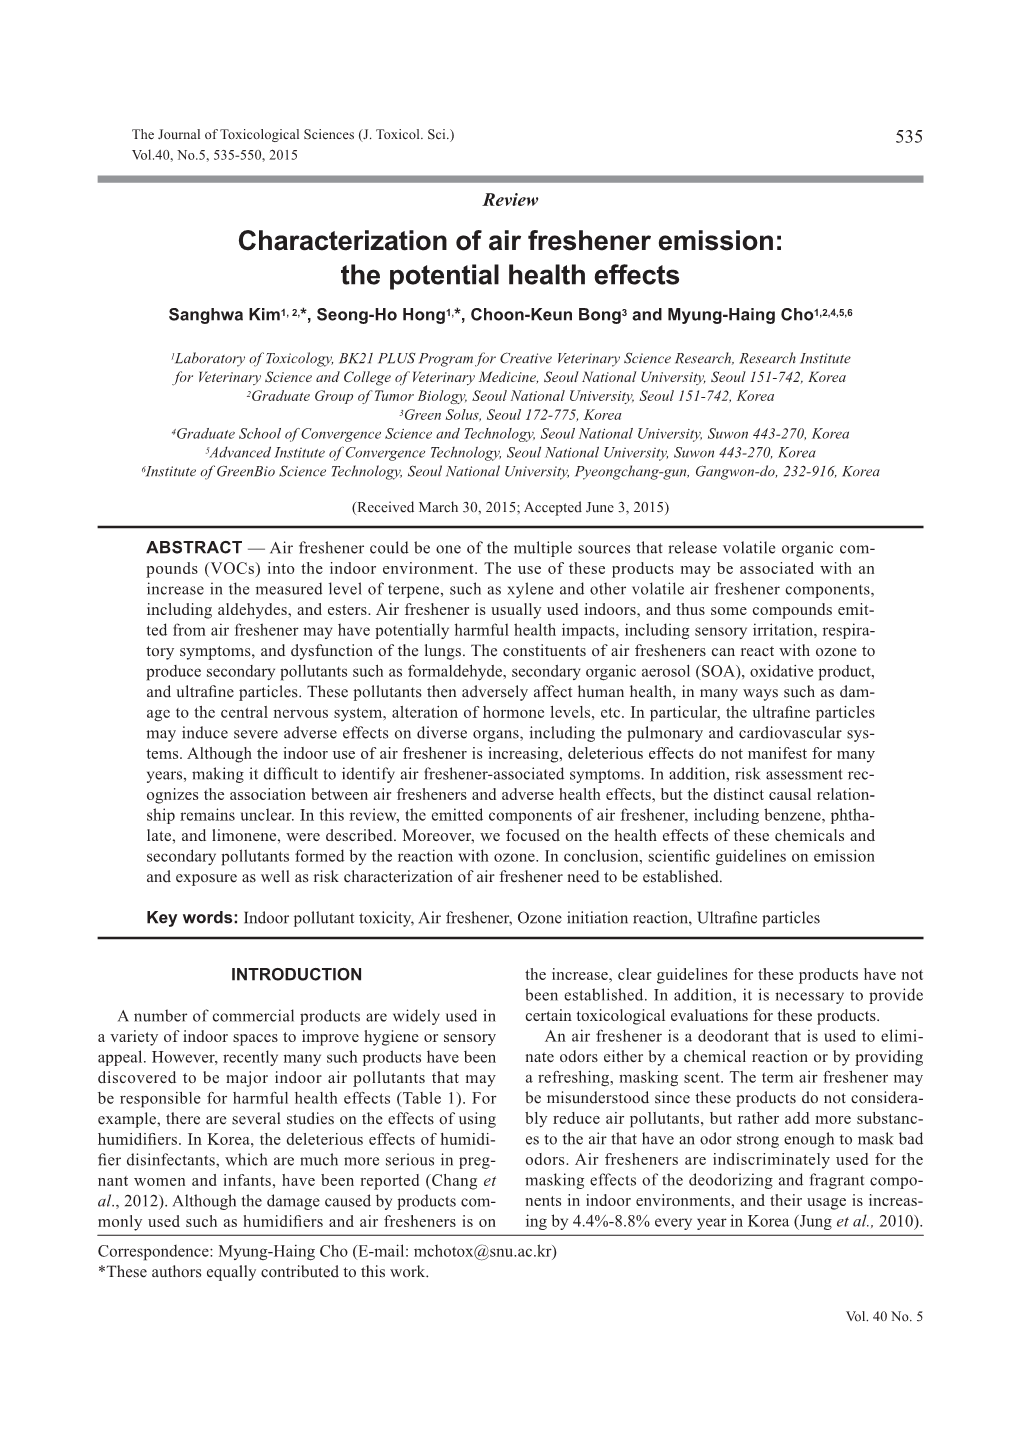 Characterization of Air Freshener Emission: the Potential Health Effects